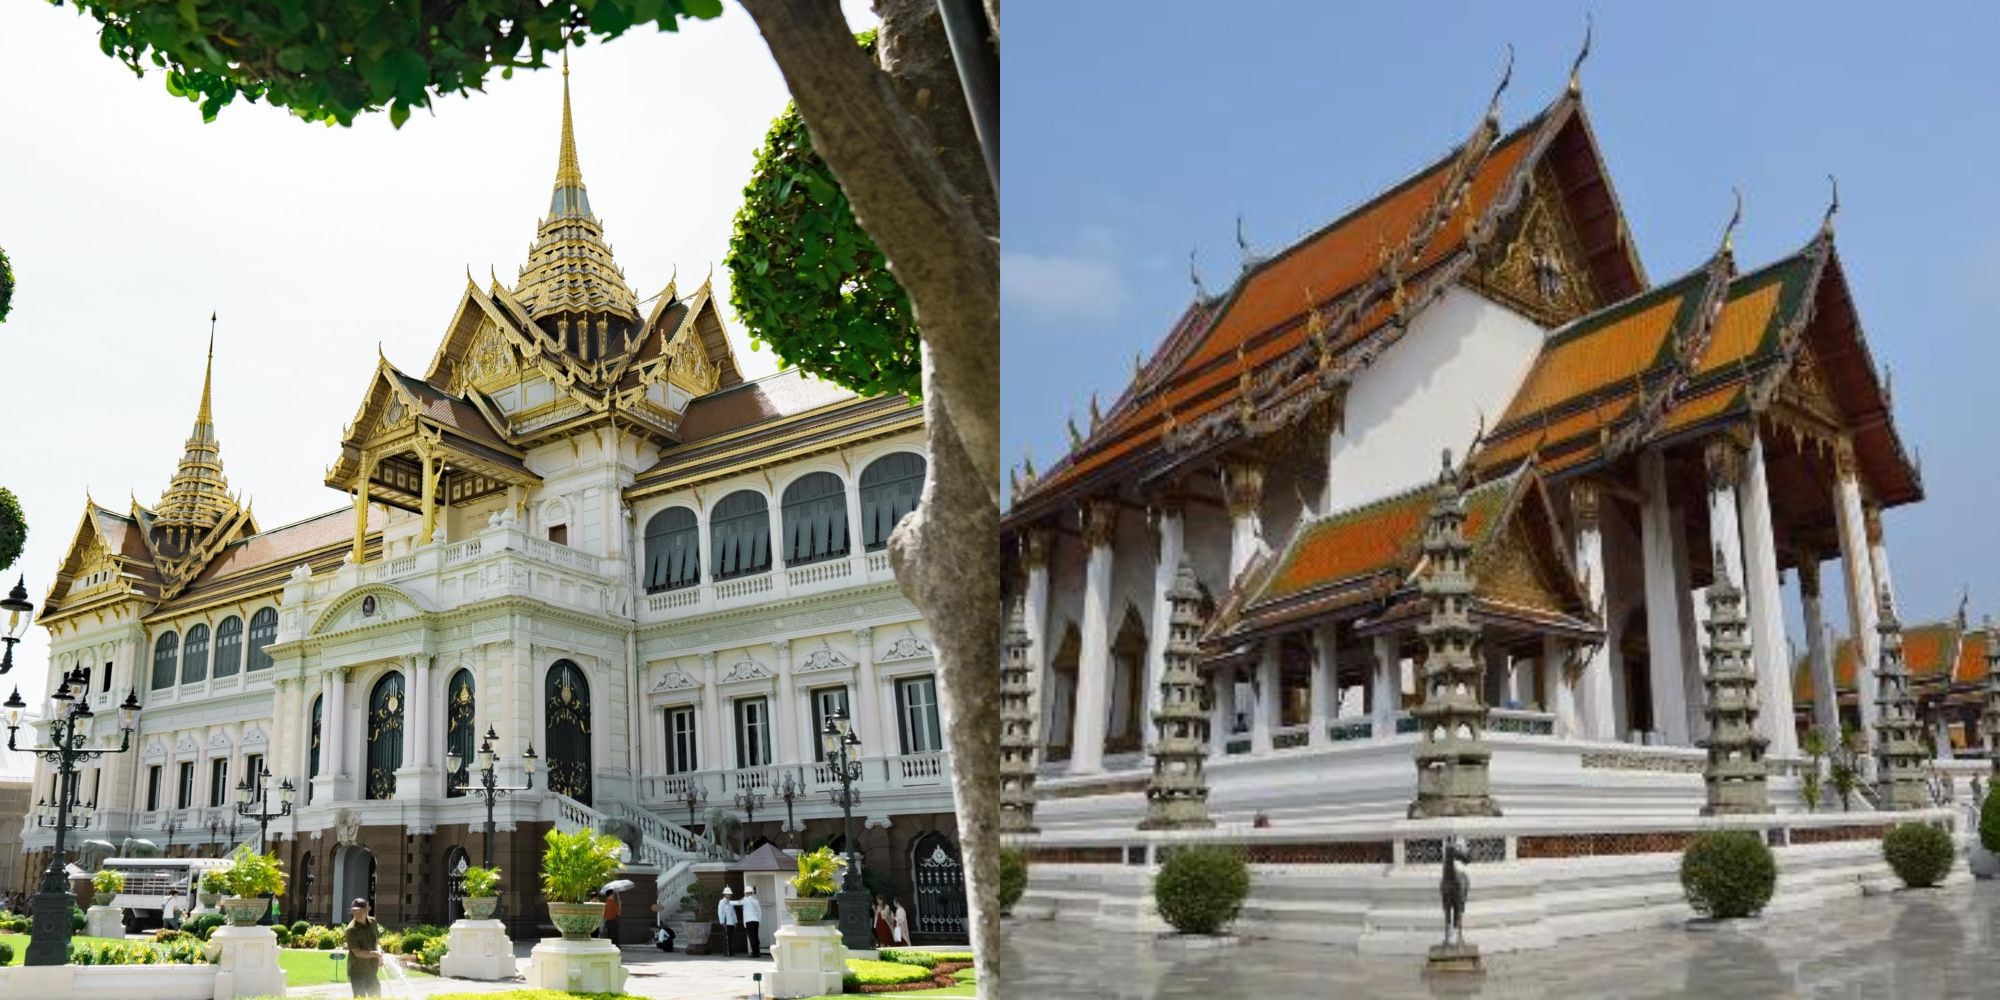 The Grand Palace and Wat Suthat